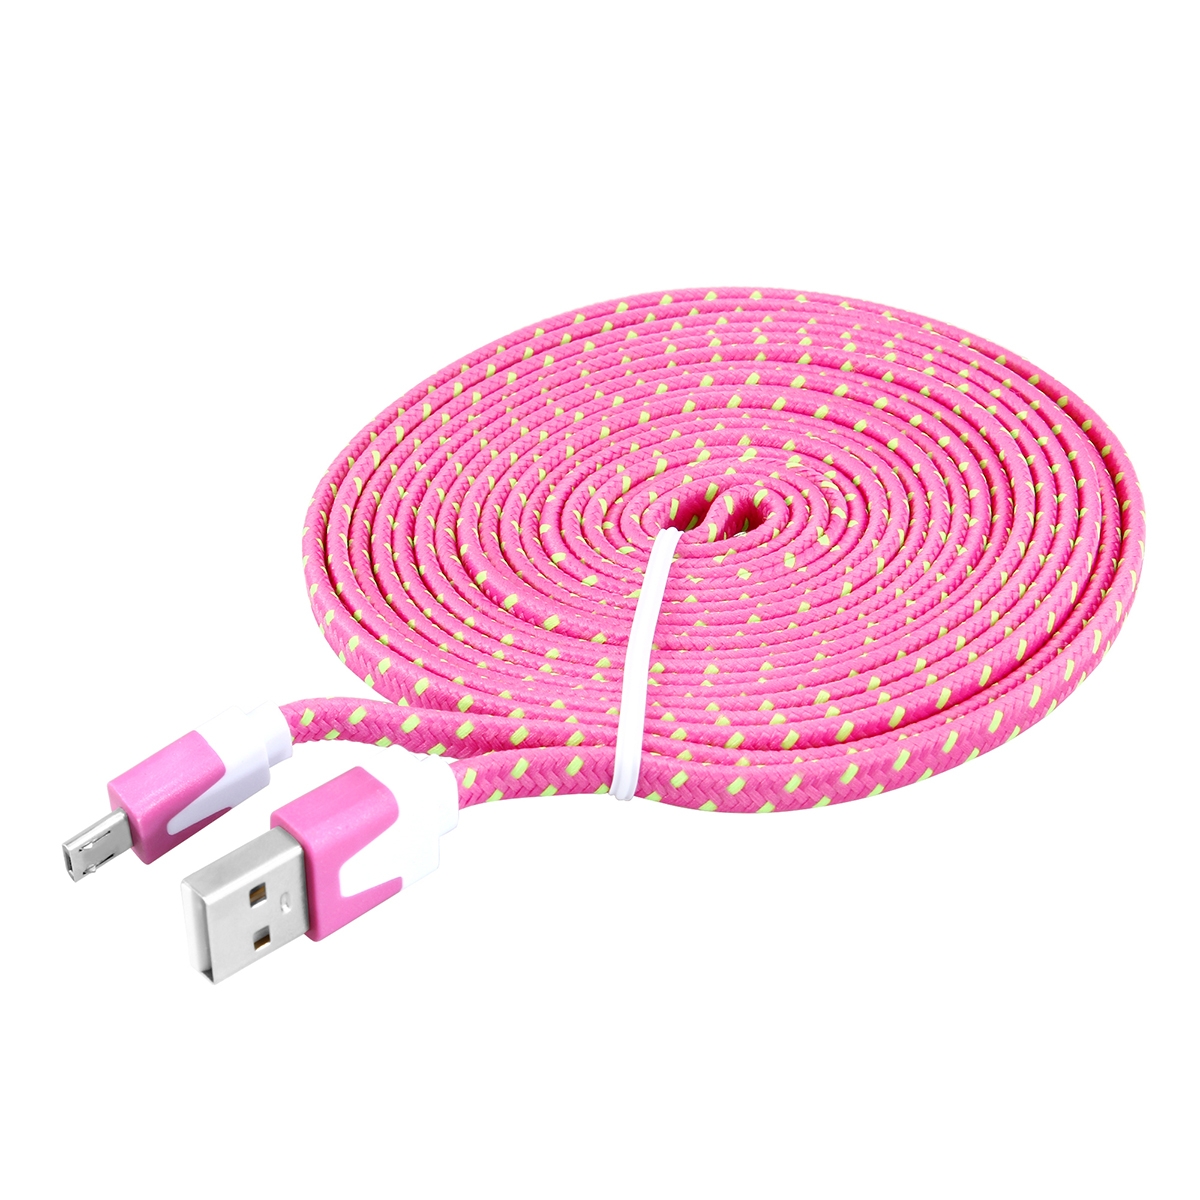 3m Weave Braid USB Data Sync Charging Cable for Samsung Android Phones - Rose Red